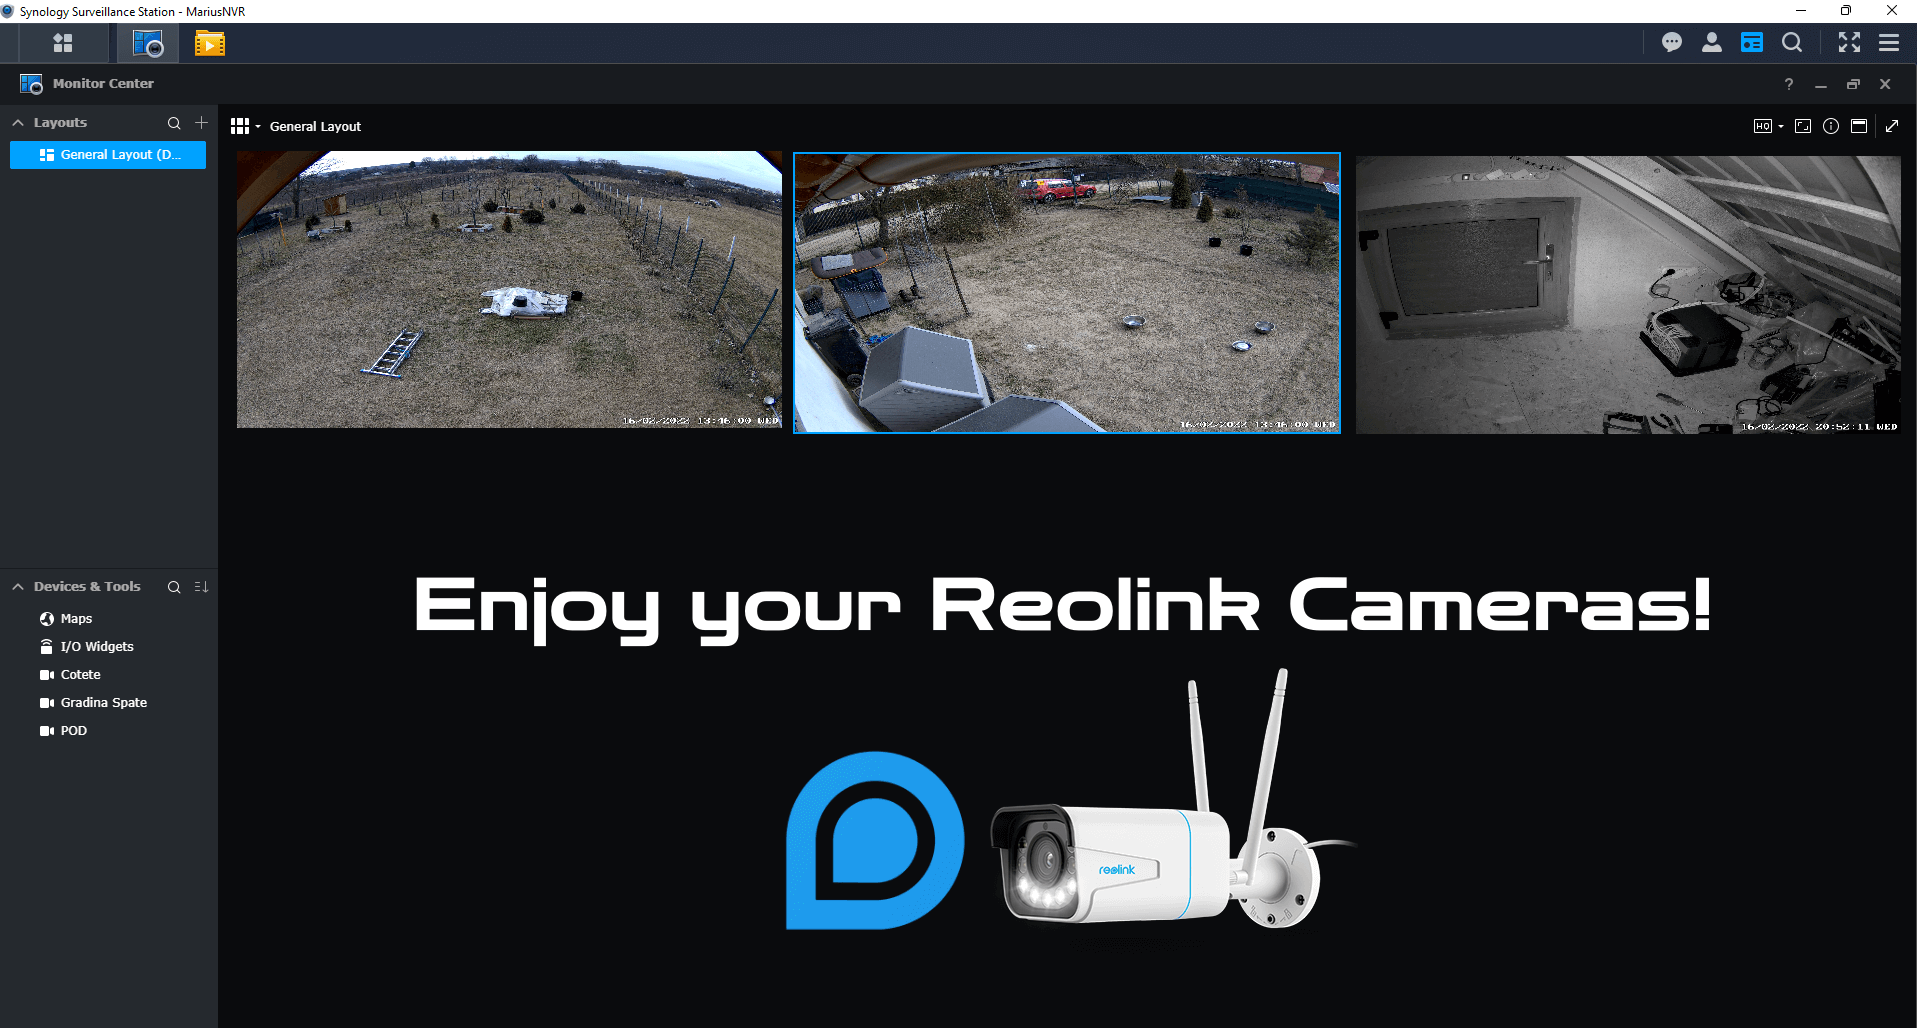 Synology add Reolink Camera to Surveillance Station 11